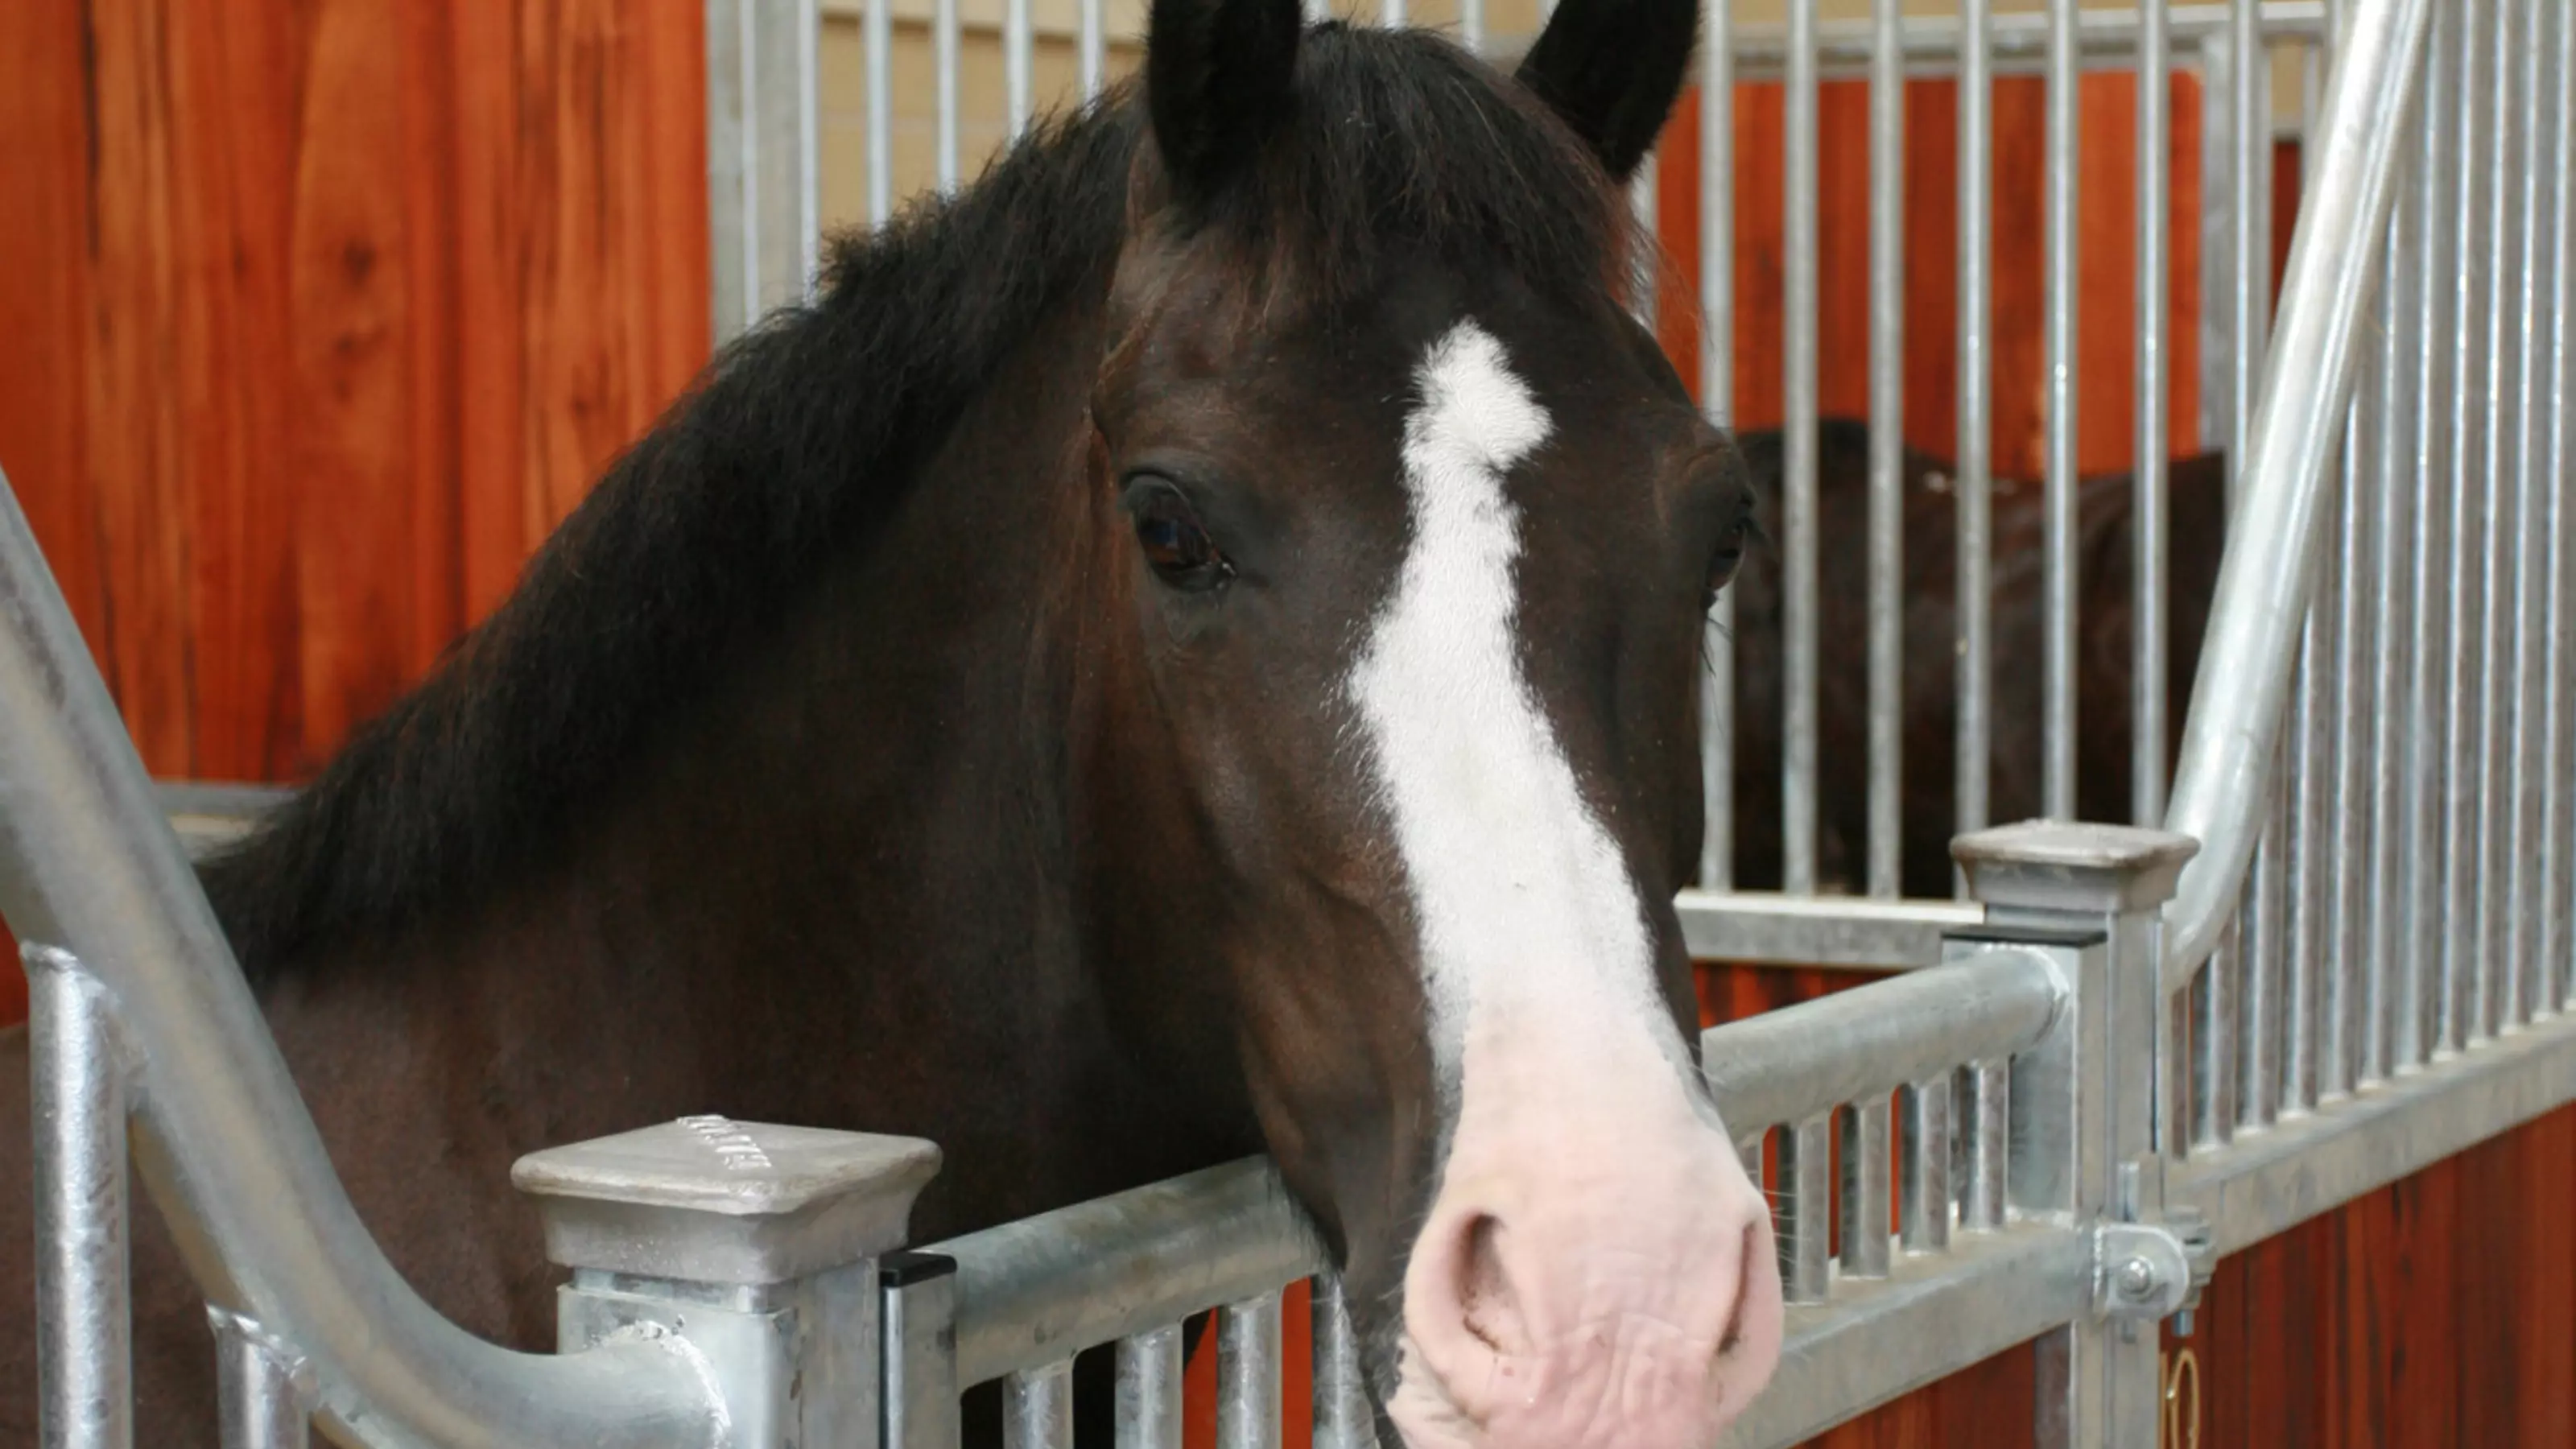 Tom in his stable at the Rolleston equine centre